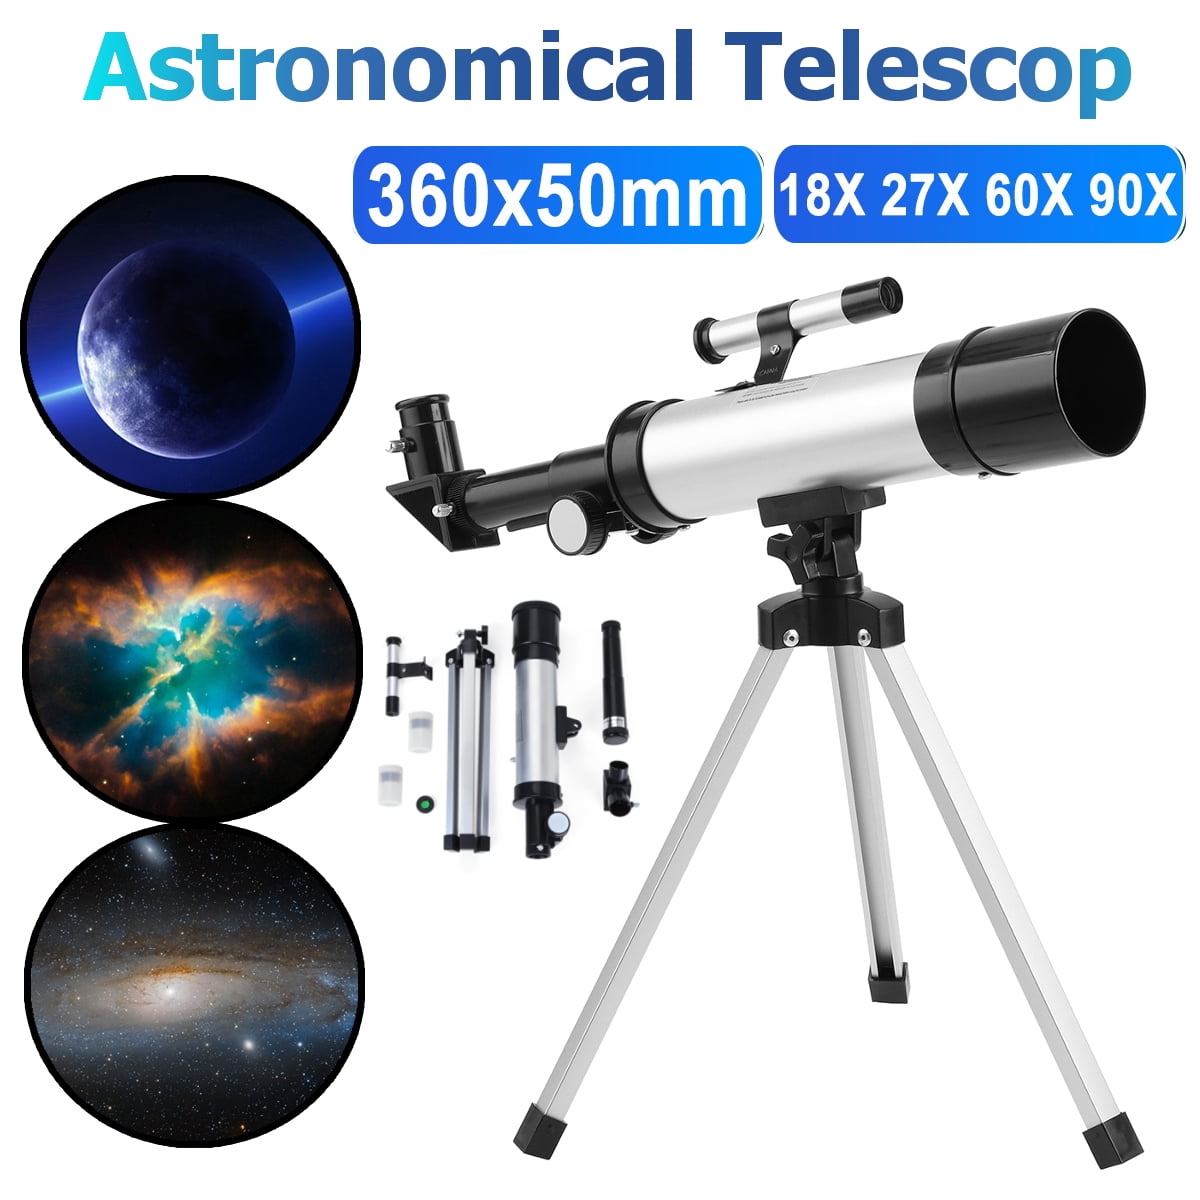 Artenjoyfine 360x50mm Refracting Telescope for Kids with Adjustable Tripod and Finder Scope,Portable Astronomical Landscape Telescope for Beginners and Adults. 